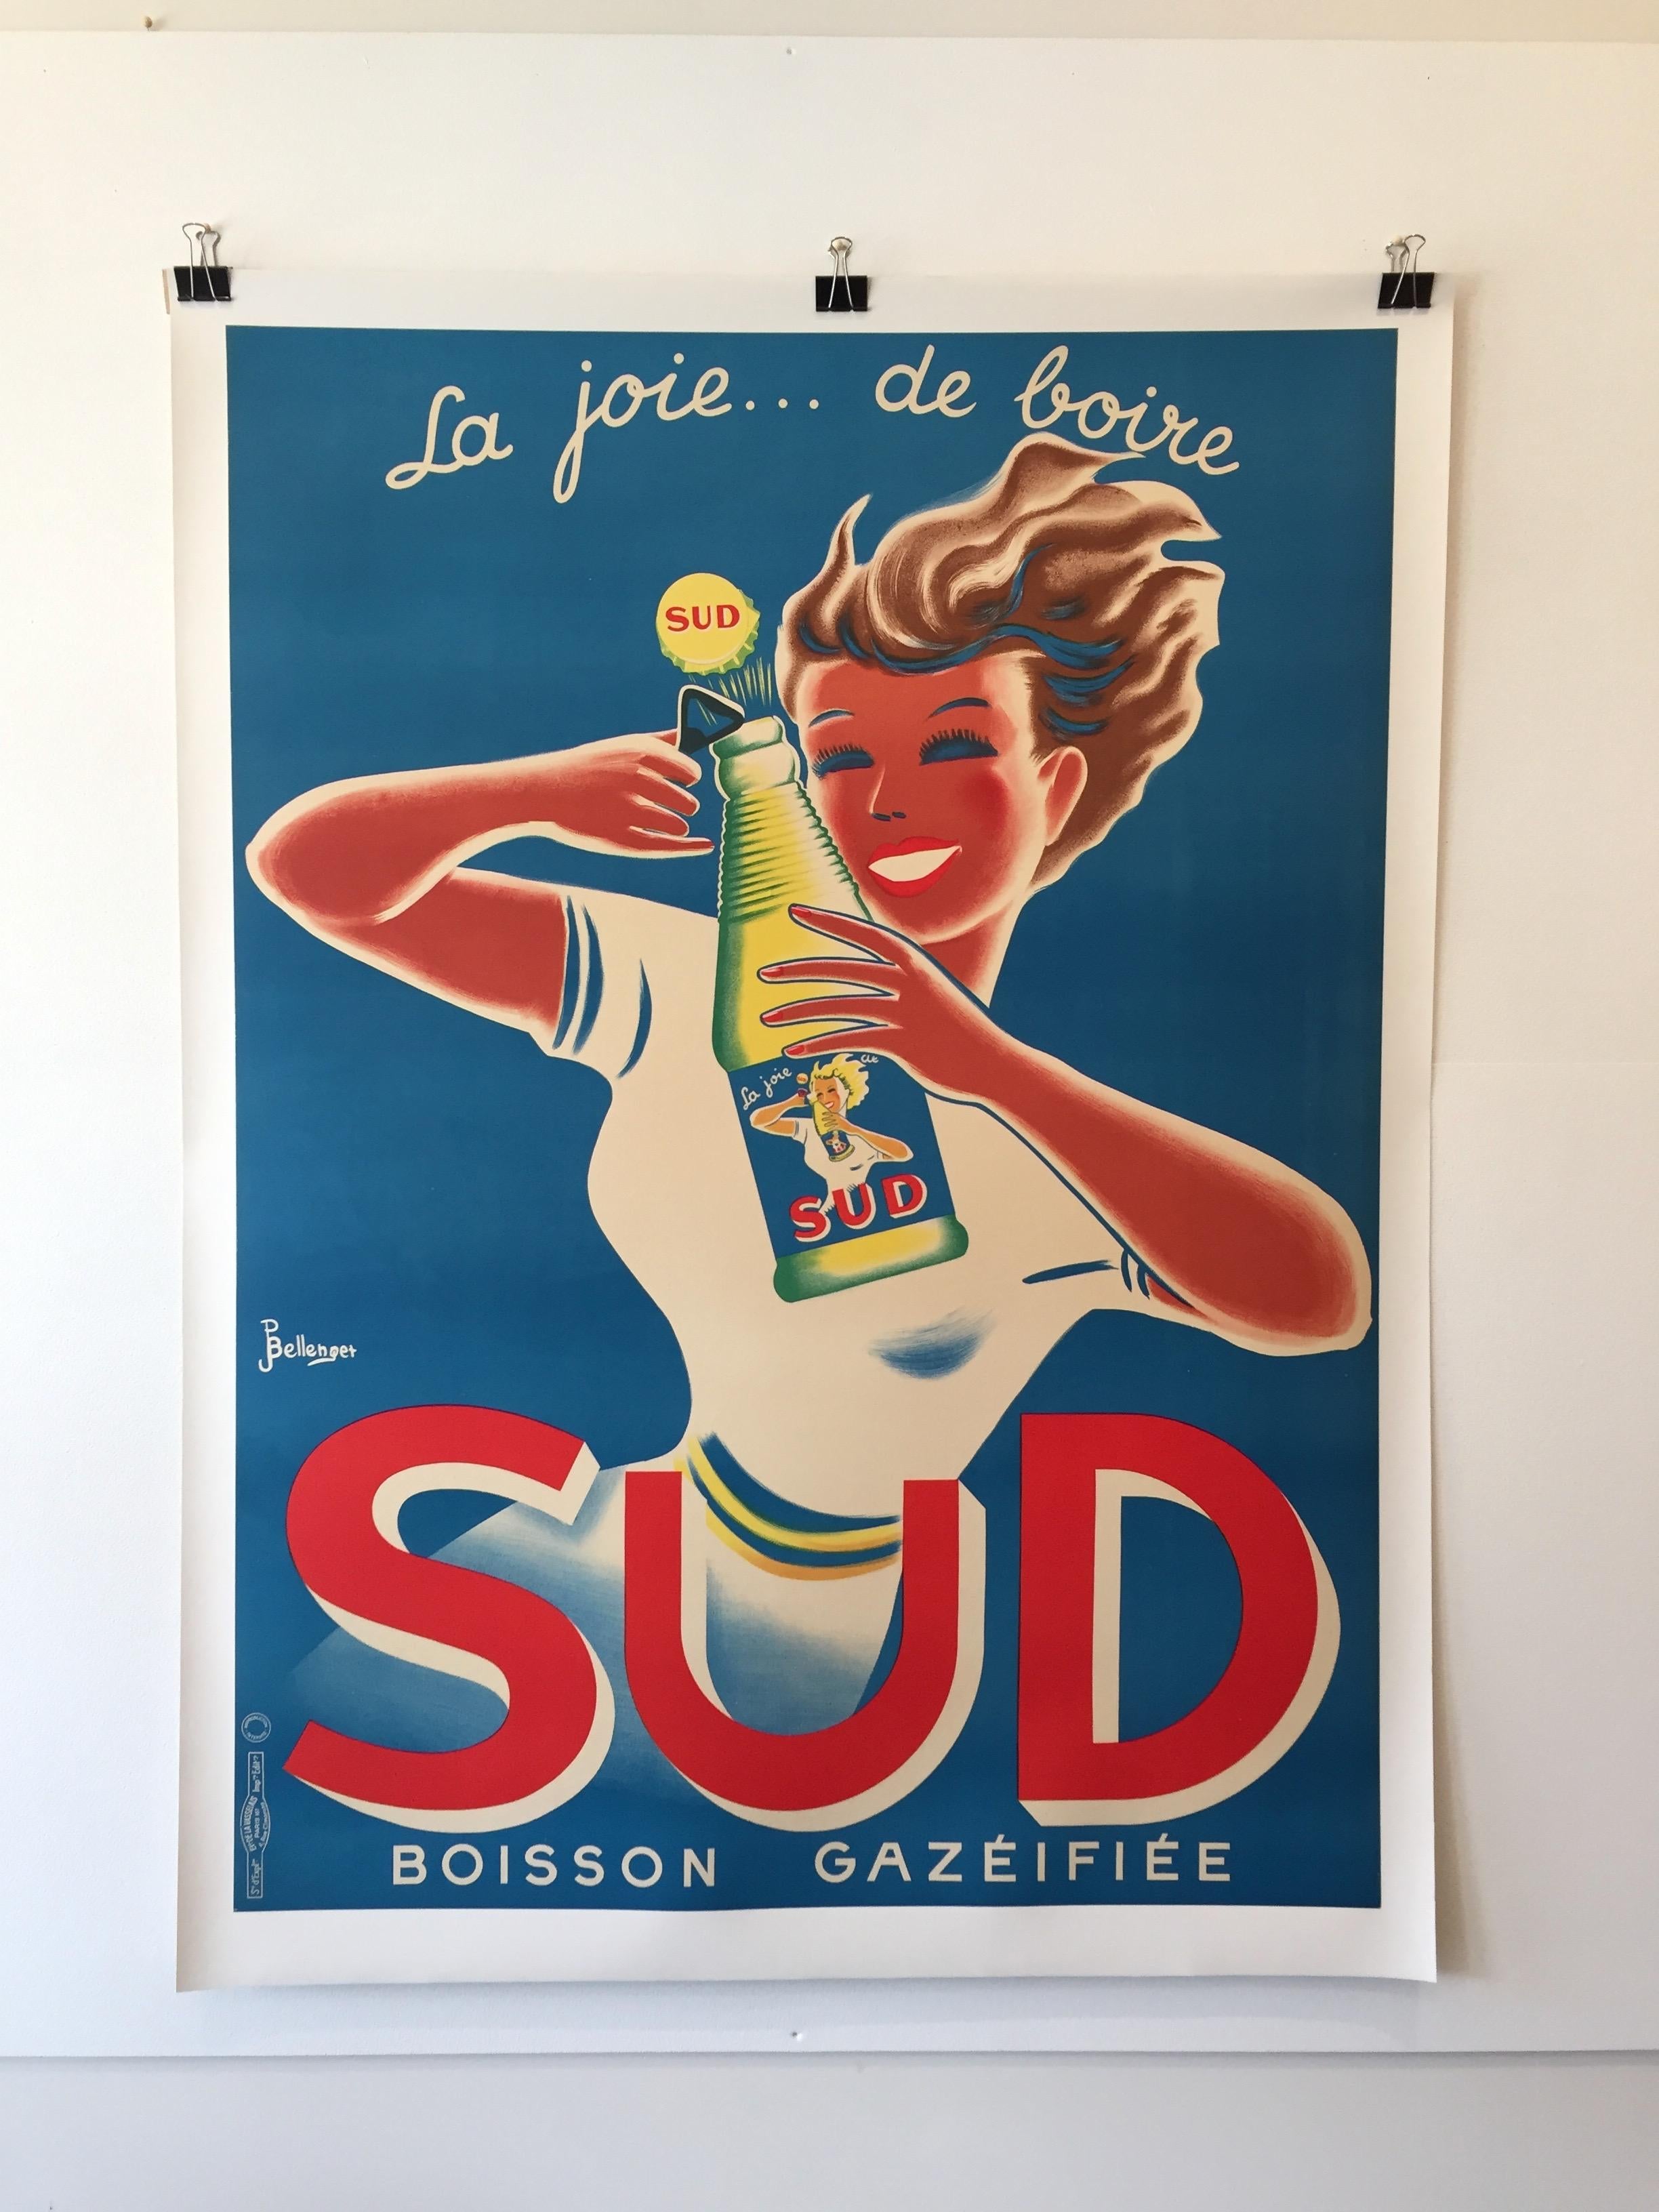 Art Deco original vintage French lithograph poster, 'SUD' by Bellenger, 1940

A charming poster from the 1940s by the well-known French artist Bellenger. 

Year
1940

Dimensions
123 x 163cm

Condition
Good

Artist
JP